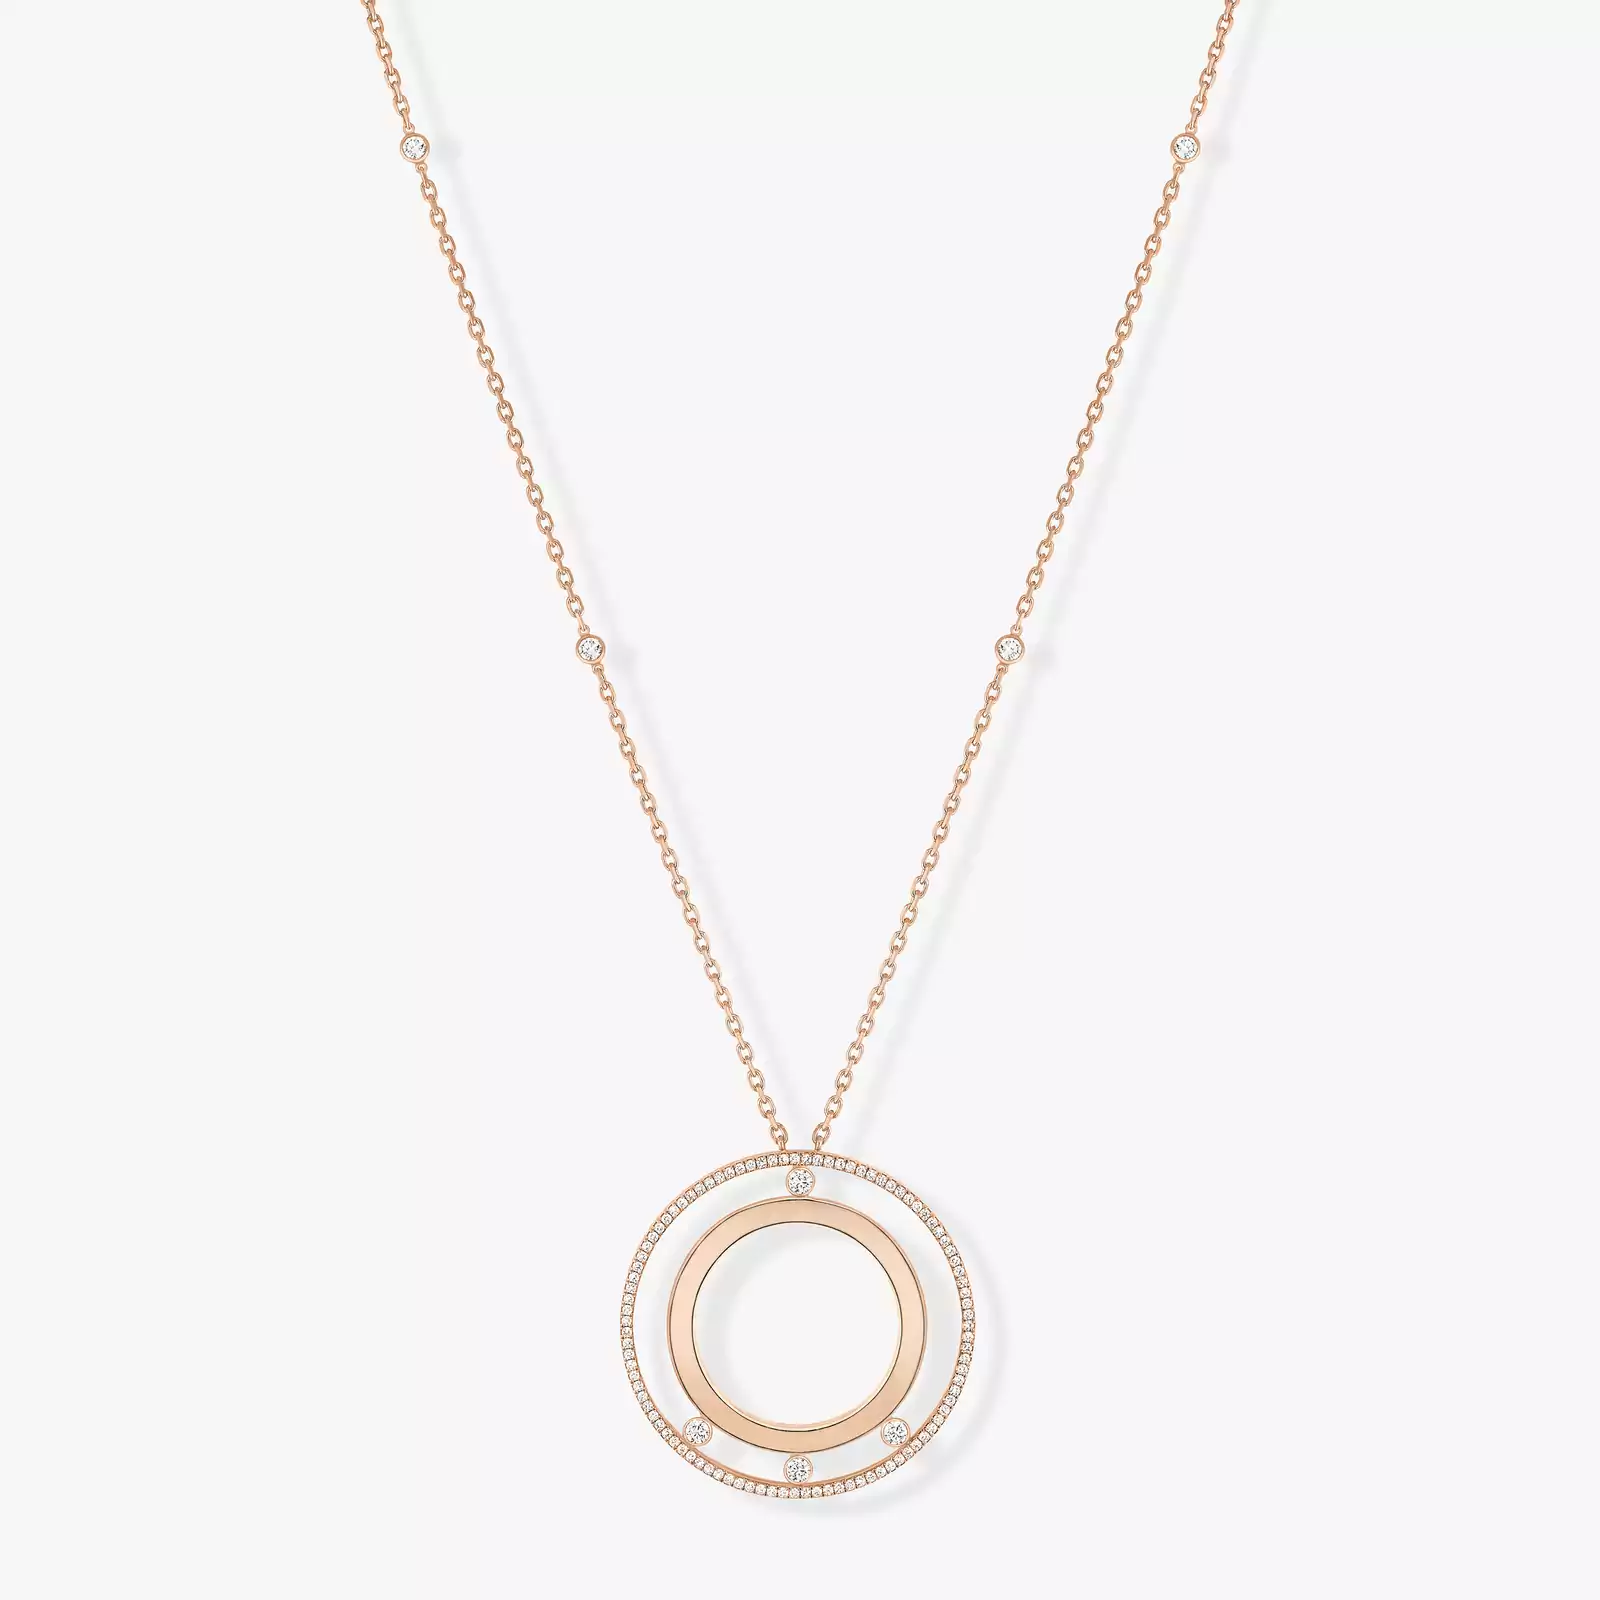 Move Romane Long Necklace Pink Gold For Her Diamond Necklace 11169-PG